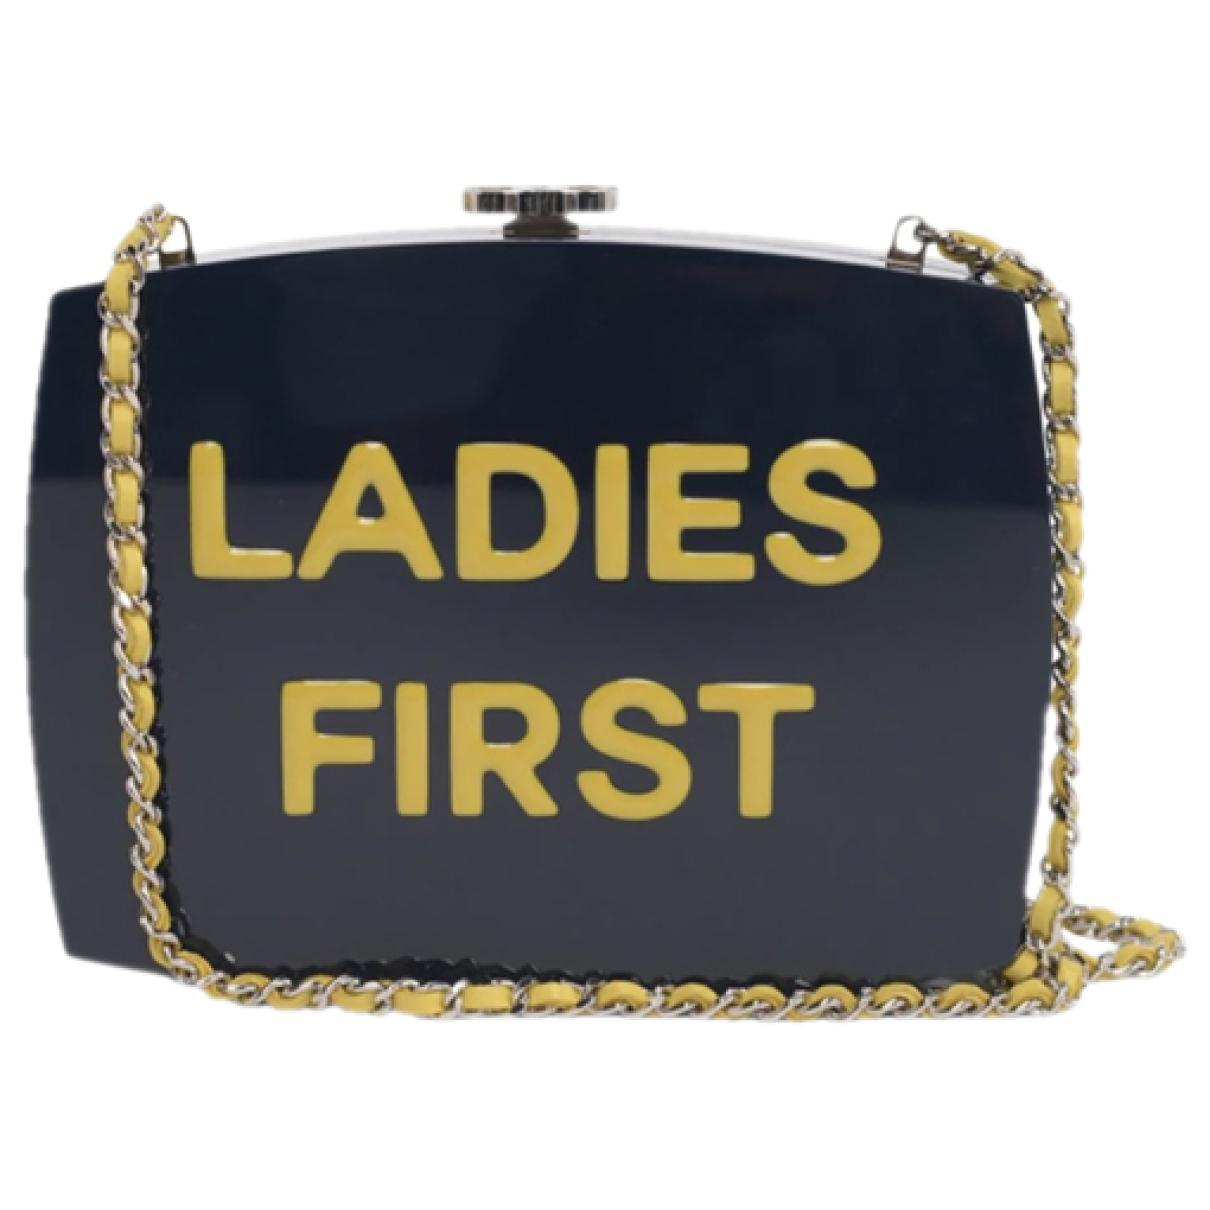 ladies first chanel bag